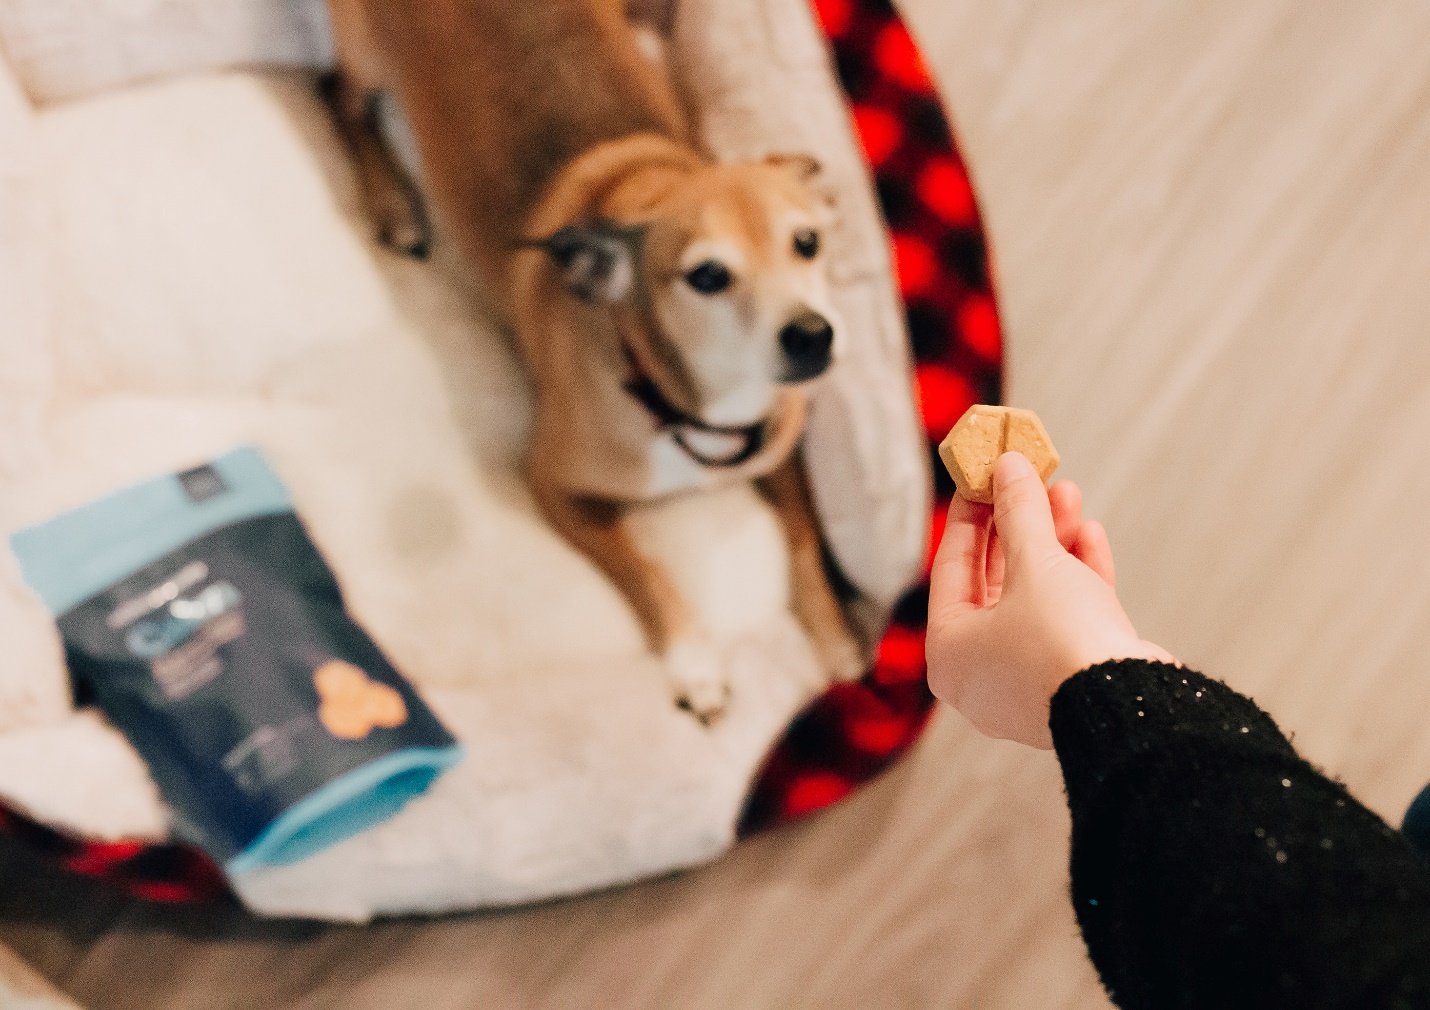 When you’re giving a treat to your dog, make sure that it isn’t any kind of nut. Nuts aren’t a dog’s best friends as they can seriously harm their digestive system. Keep reading to know more.